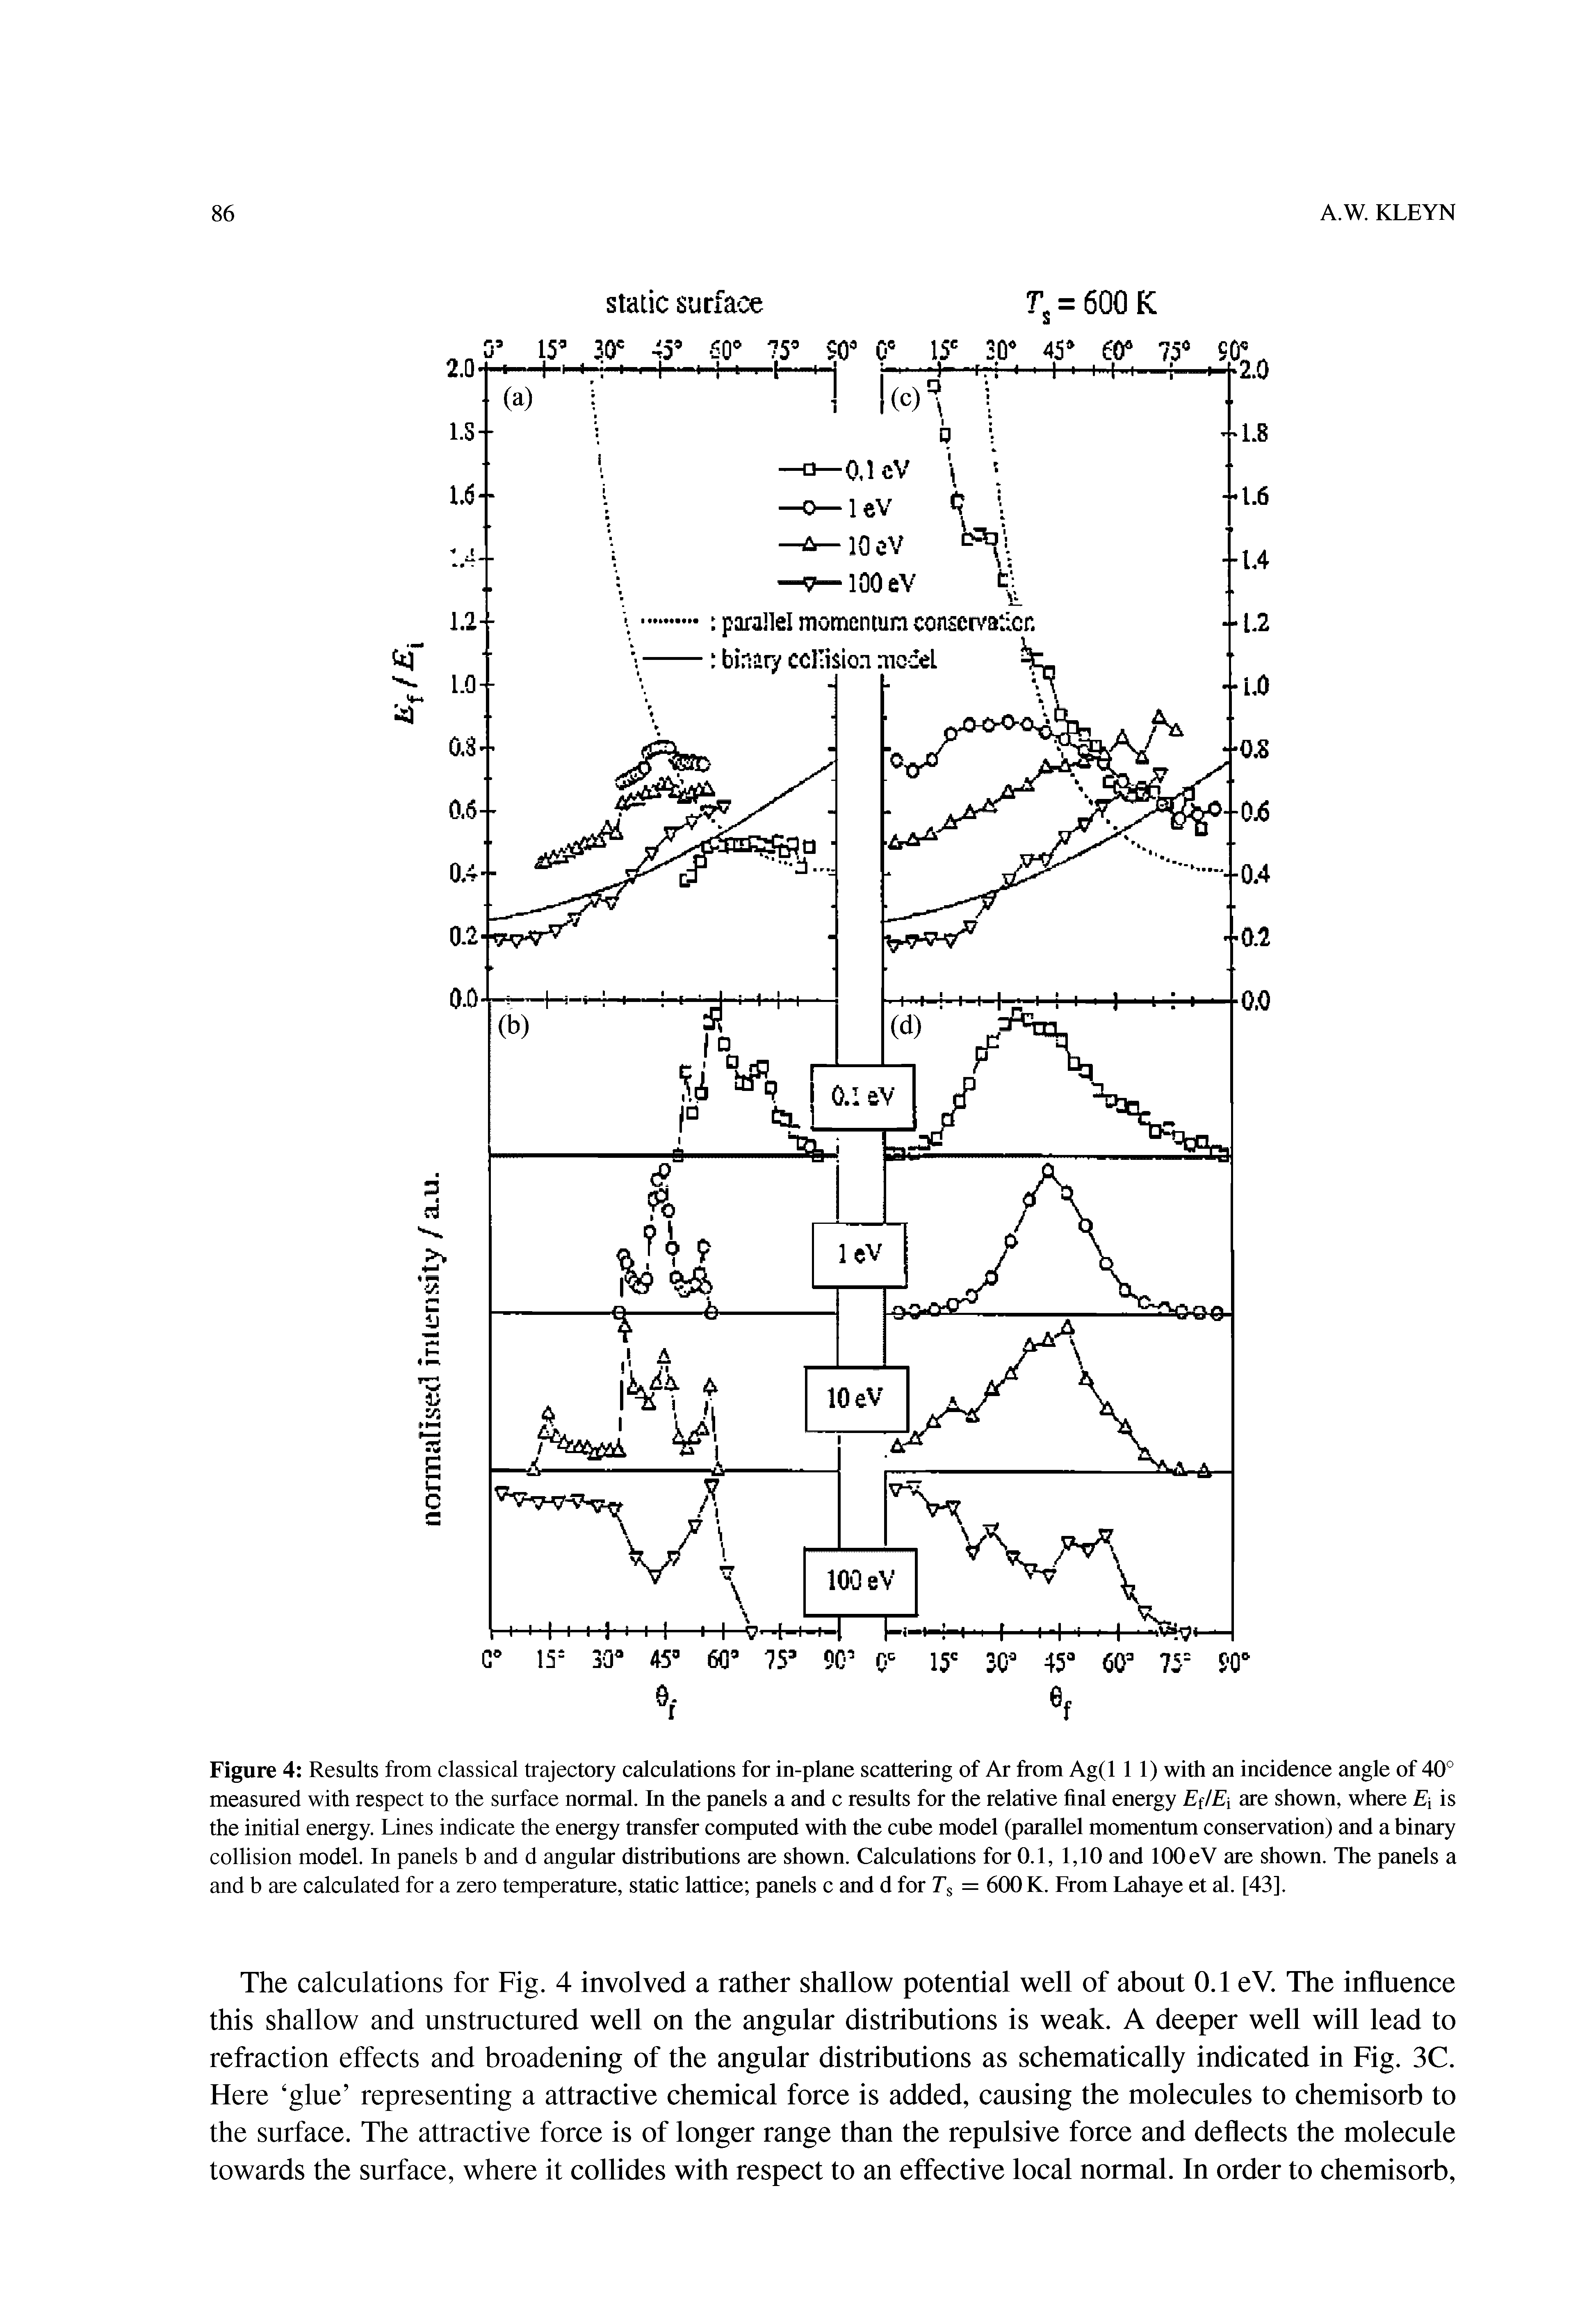 Figure 4 Results from classical trajectory calculations for in-plane scattering of Ar from Ag(l 11) with an incidence angle of 40° measured with respect to the surface normal. In the panels a and c results for the relative final energy Ef/Ei are shown, where E is the initial energy. Lines indicate the energy transfer computed with the cube model (parallel momentum conservation) and a binary collision model. In panels b and d angular distributions are shown. Calculations for 0.1, 1,10 and lOOeV are shown. The panels a and b are calculated for a zero temperature, static lattice panels c and d for Ts = 600 K. From Lahaye et al. [43].